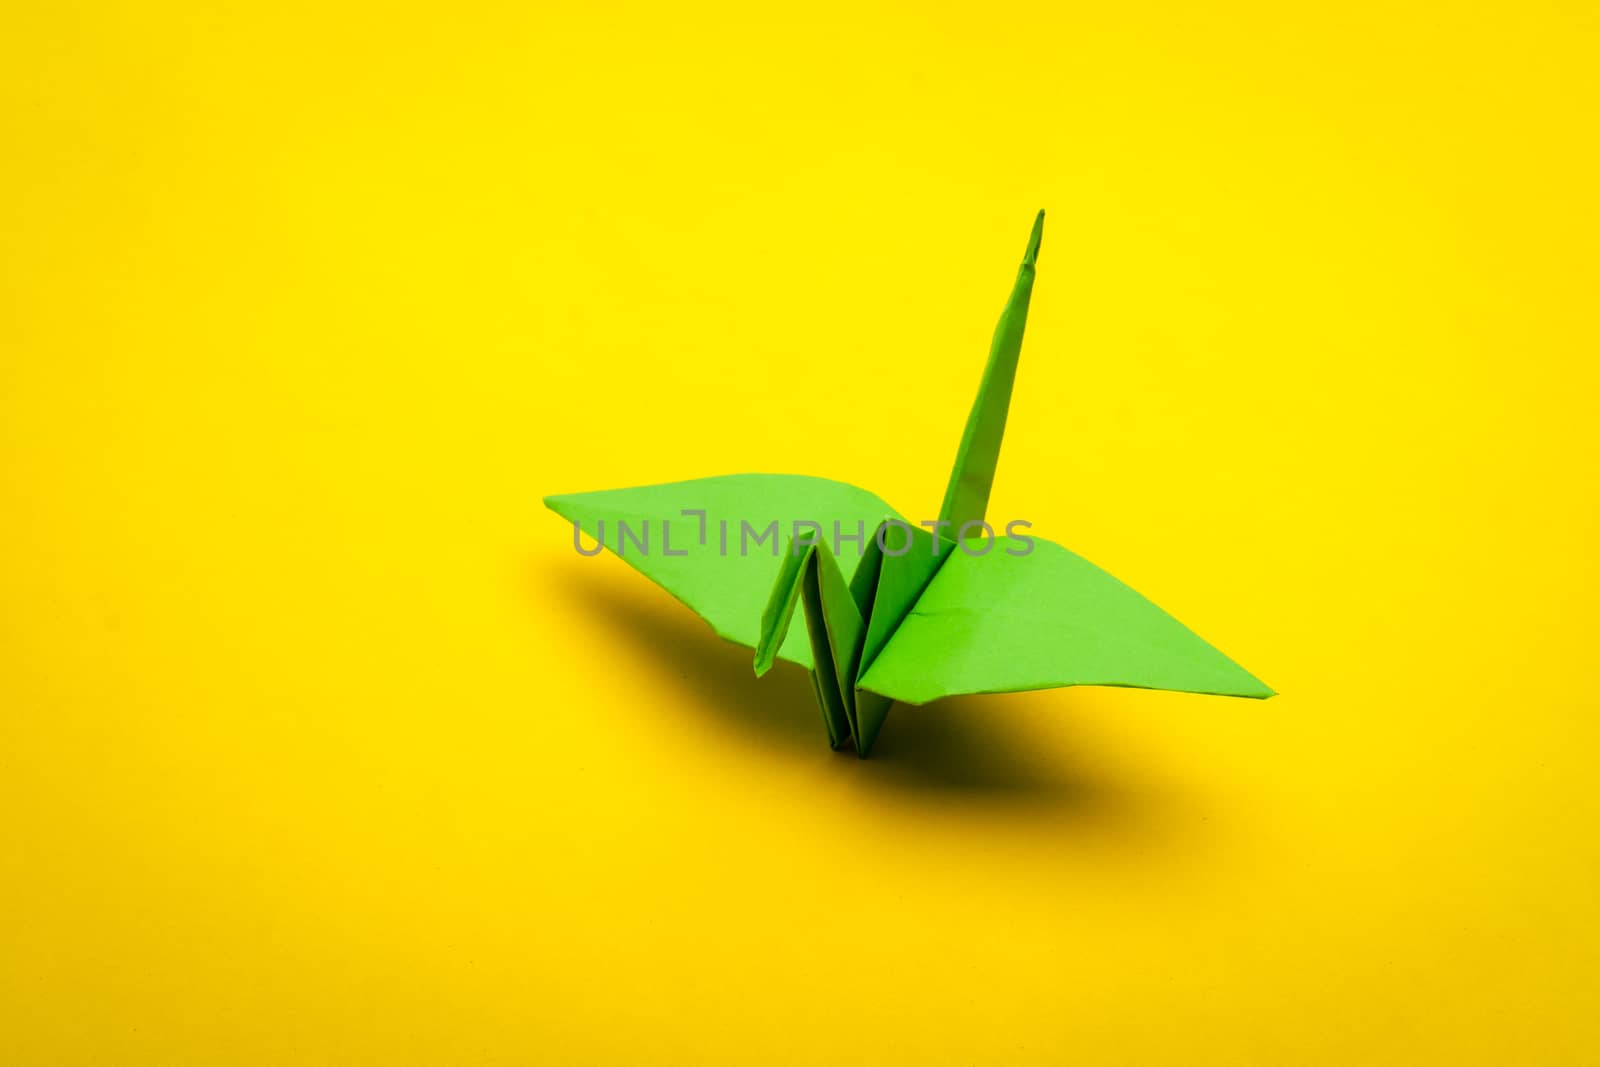 green origami paper crane on yellow paper background